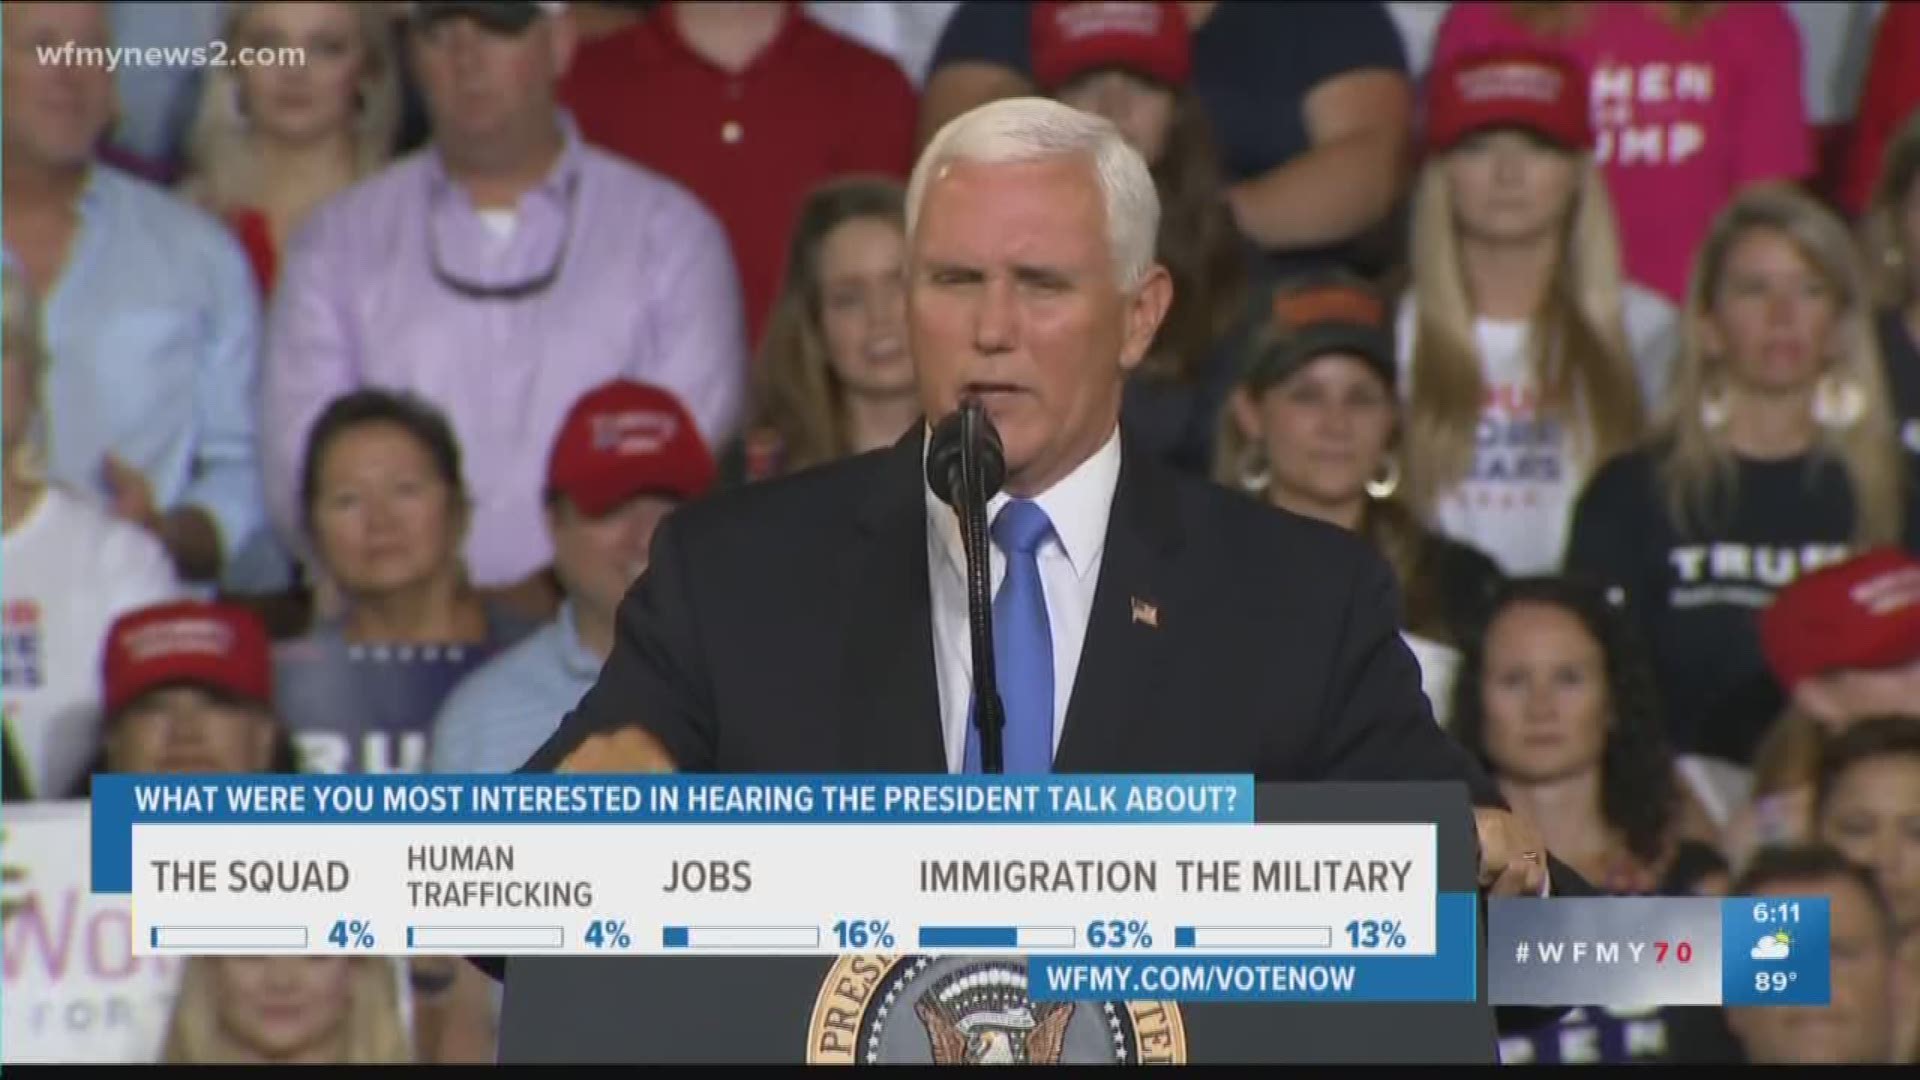 V. P. Pence made a claim that about 6 million new jobs have been created in the U.S. since election day during his speech at a rally in Greenville, North Carolina. We're verifying to see if they're true.